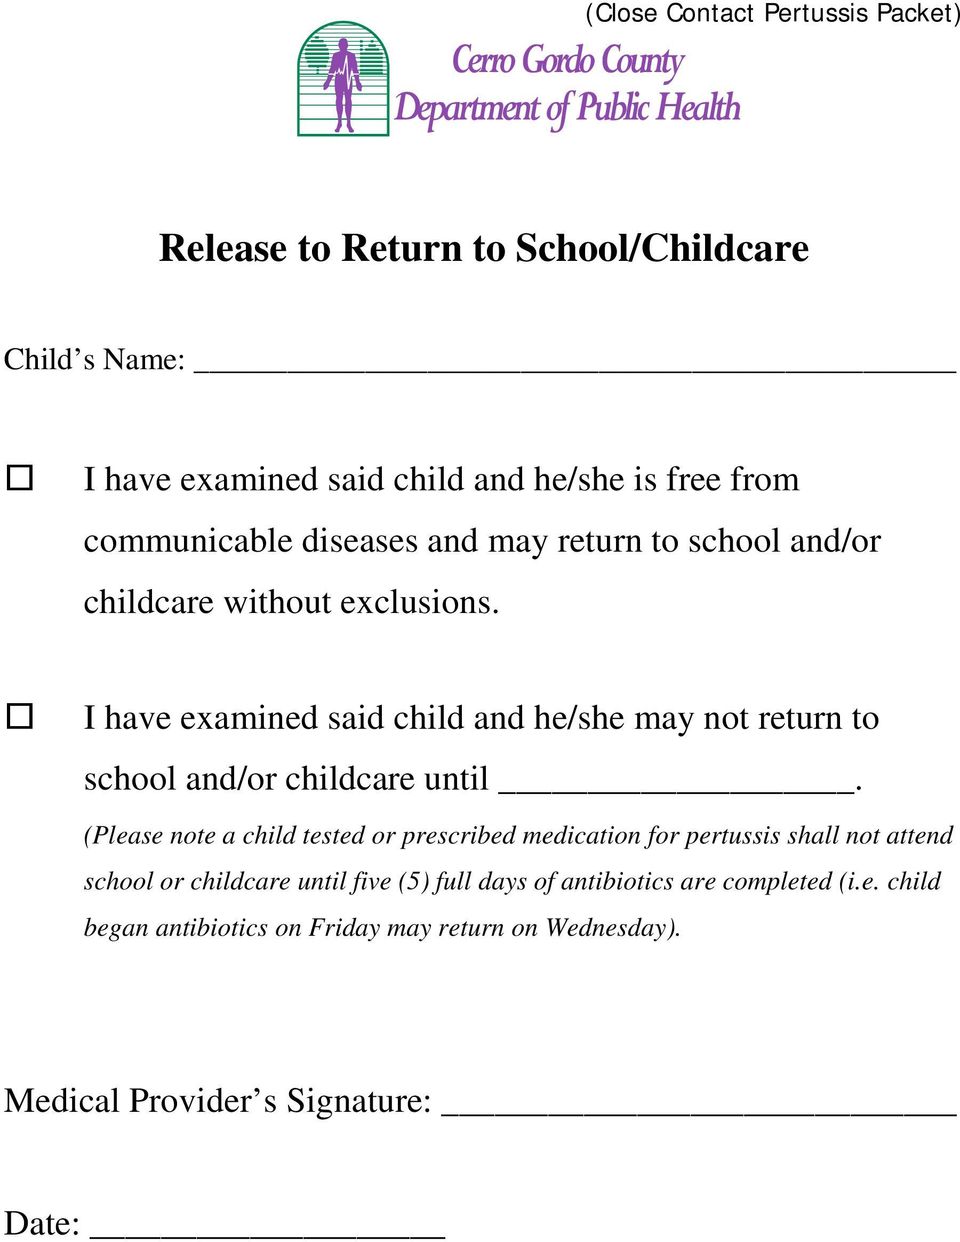 I have examined said child and he/she may not return to school and/or childcare until.